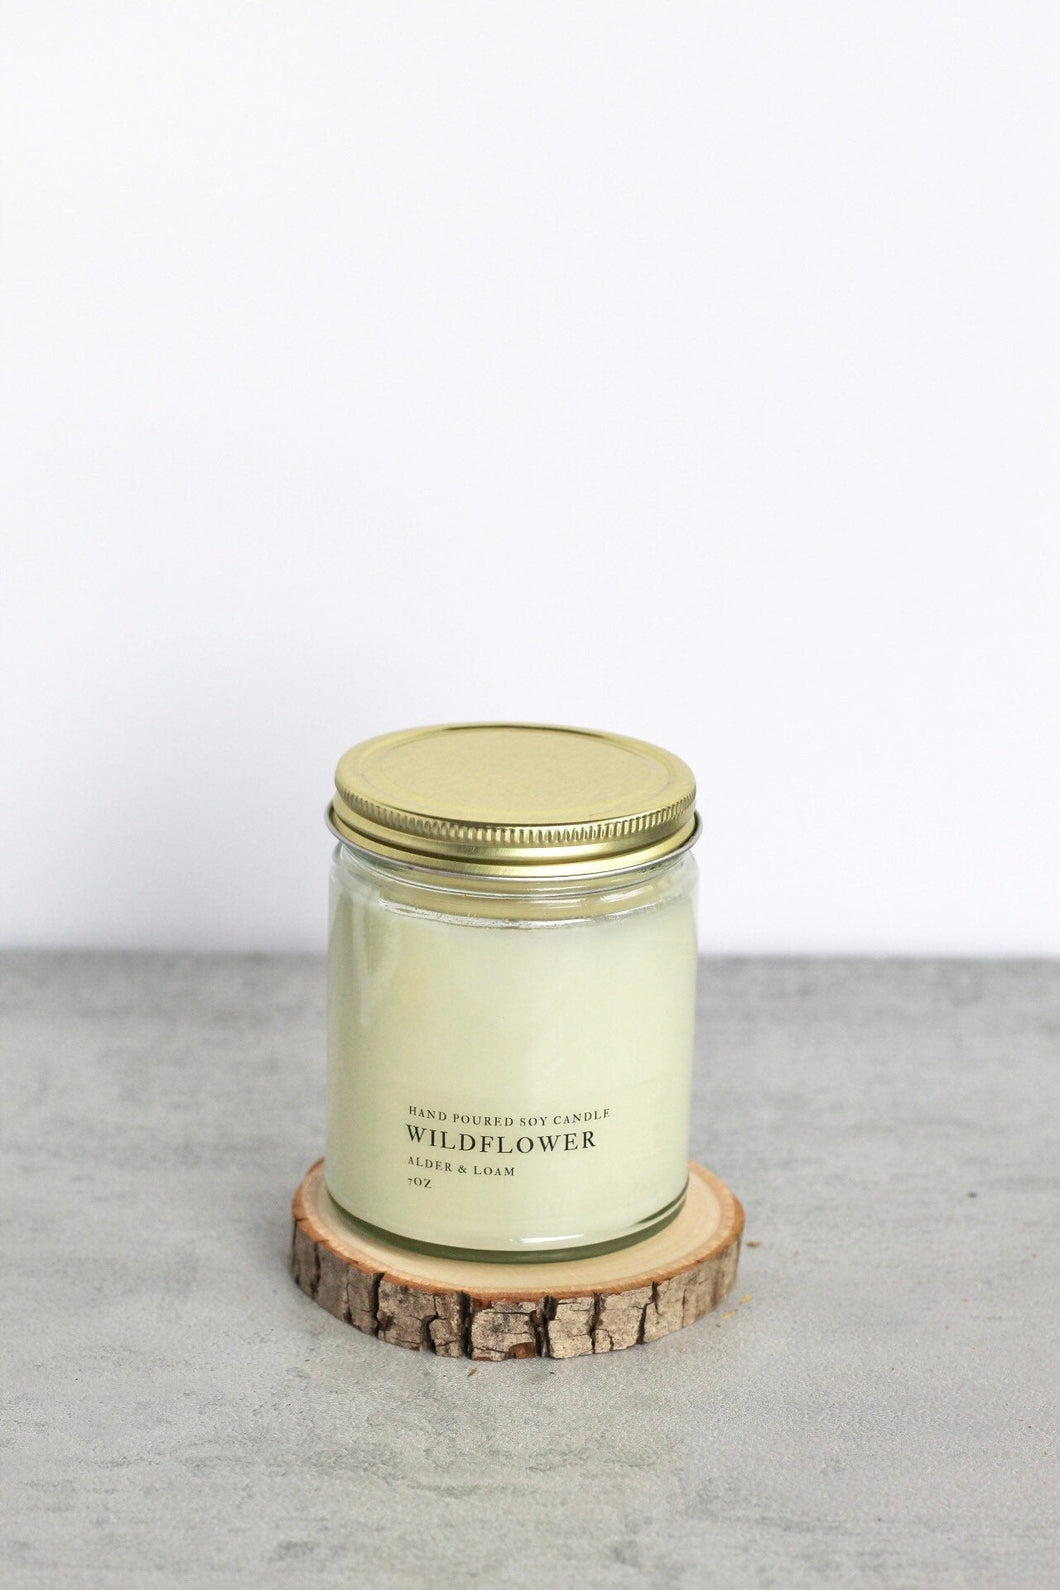 Wildflower Soy Candle, Hand Poured, Natural, Eco Friendly, Earthy Scent, 7 oz Jar